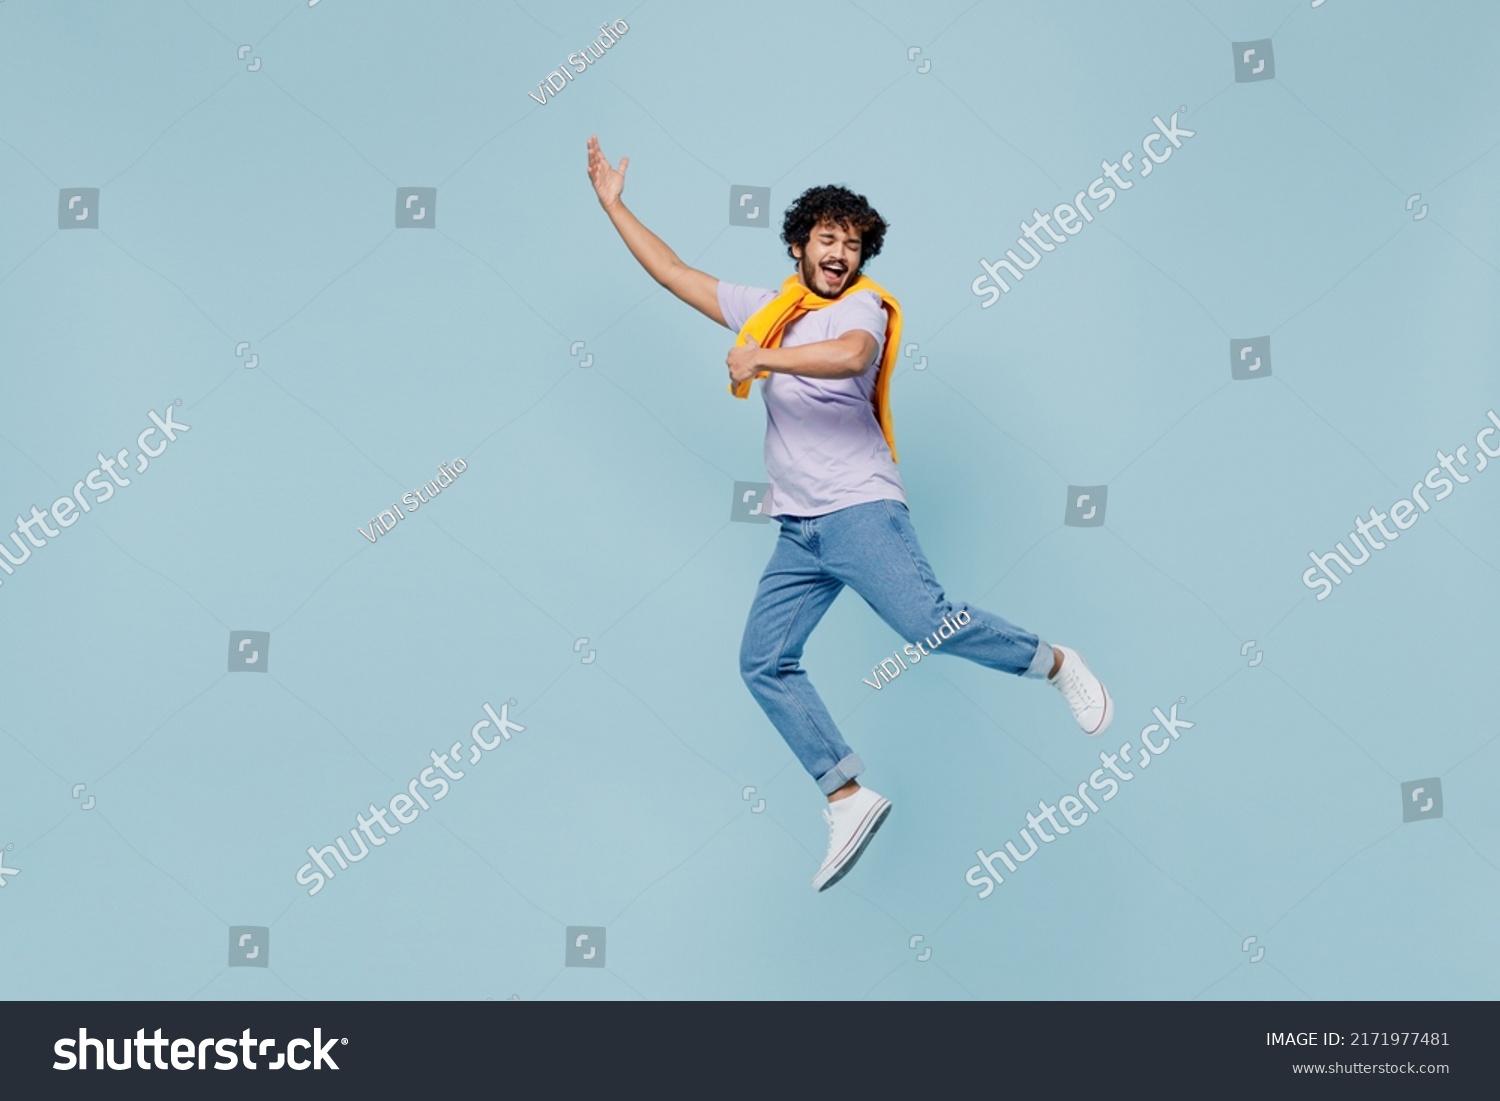 Full size body length amazing happy young bearded Indian man 20s years old wears white t-shirt singing song dreaming like playing guitar isolated on plain pastel light blue background studio portrait #2171977481